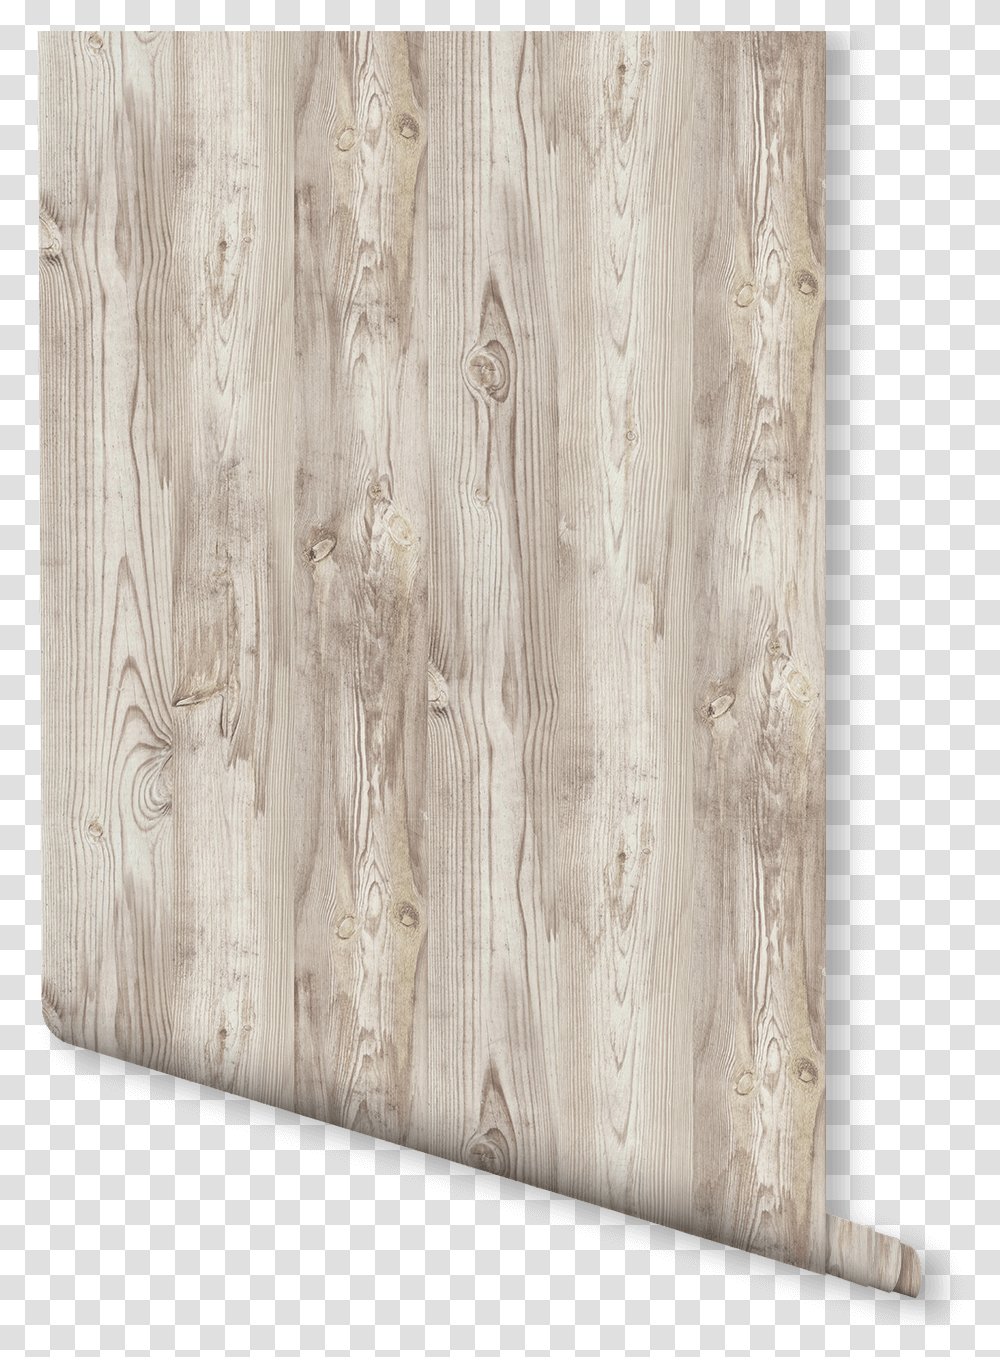 Plank, Tabletop, Furniture, Wood, Plywood Transparent Png